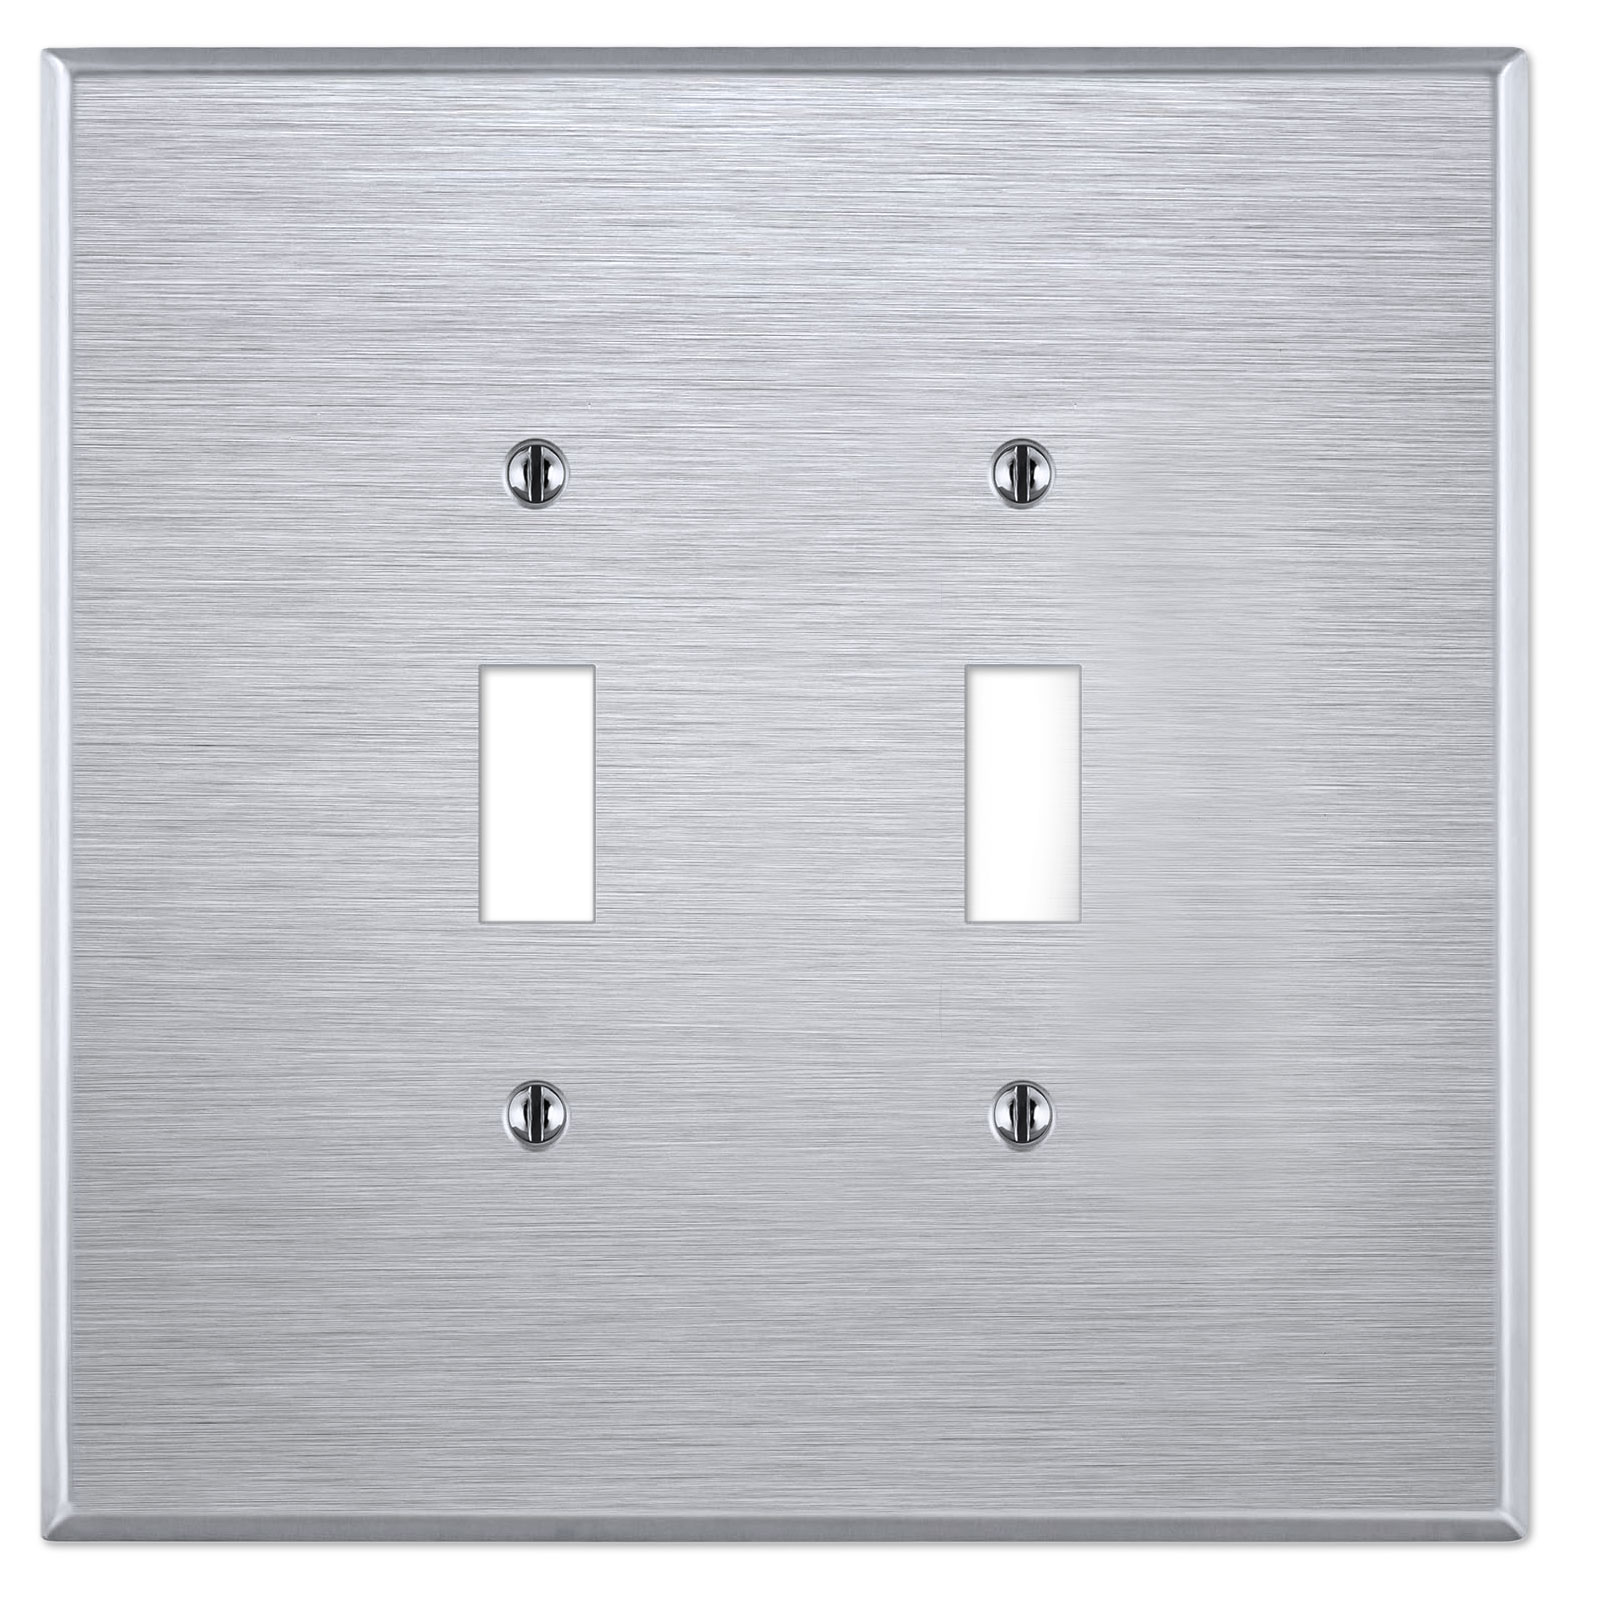 Stainless Steel Standard Size Switch Plates